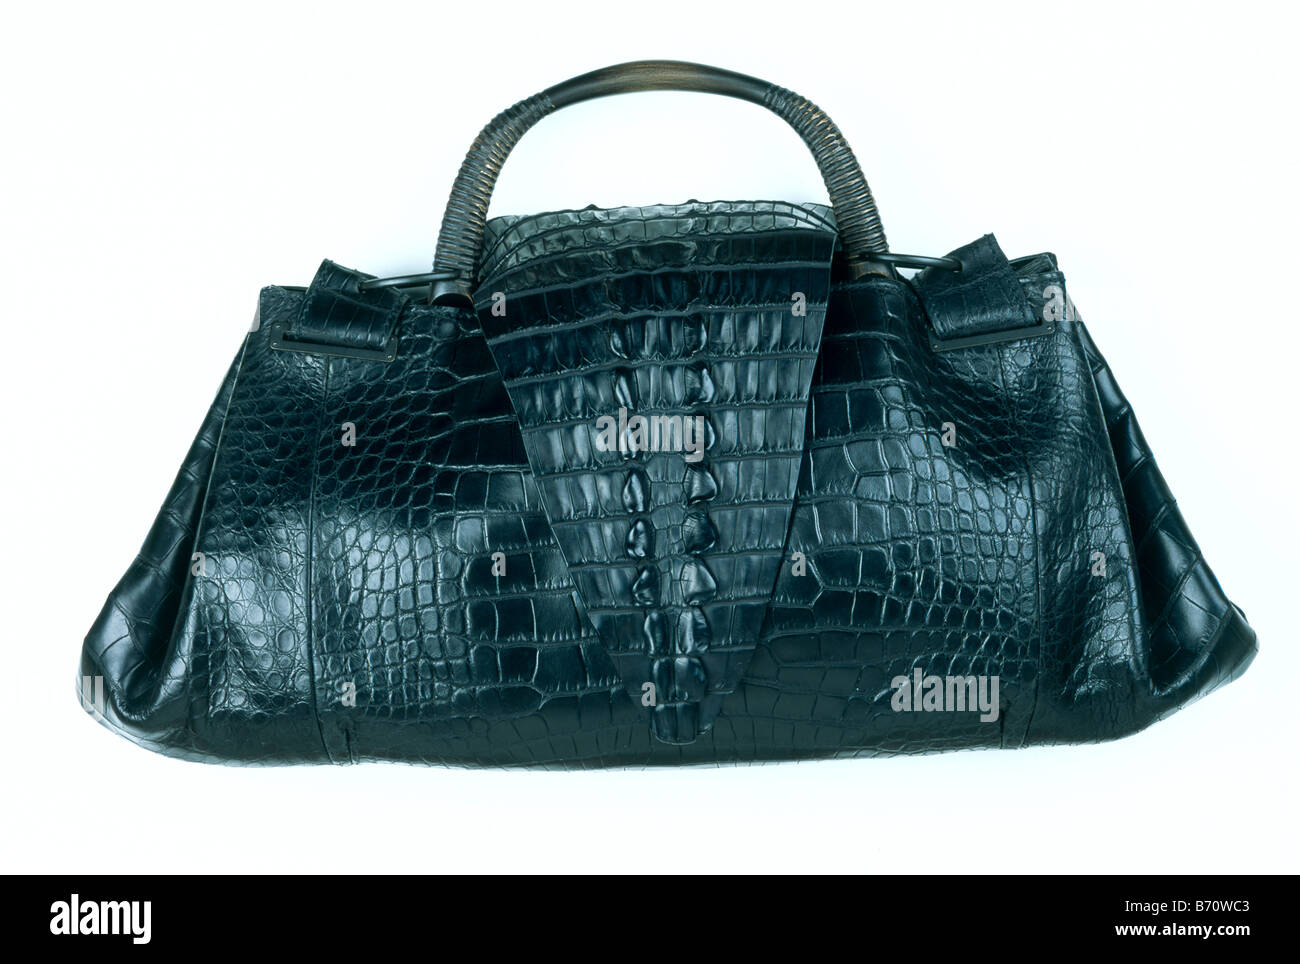 Bag from Faux Crocodile Skin with Liz Claiborne Brand on a Black Background  Editorial Photography - Image of doeskin, border: 177919427